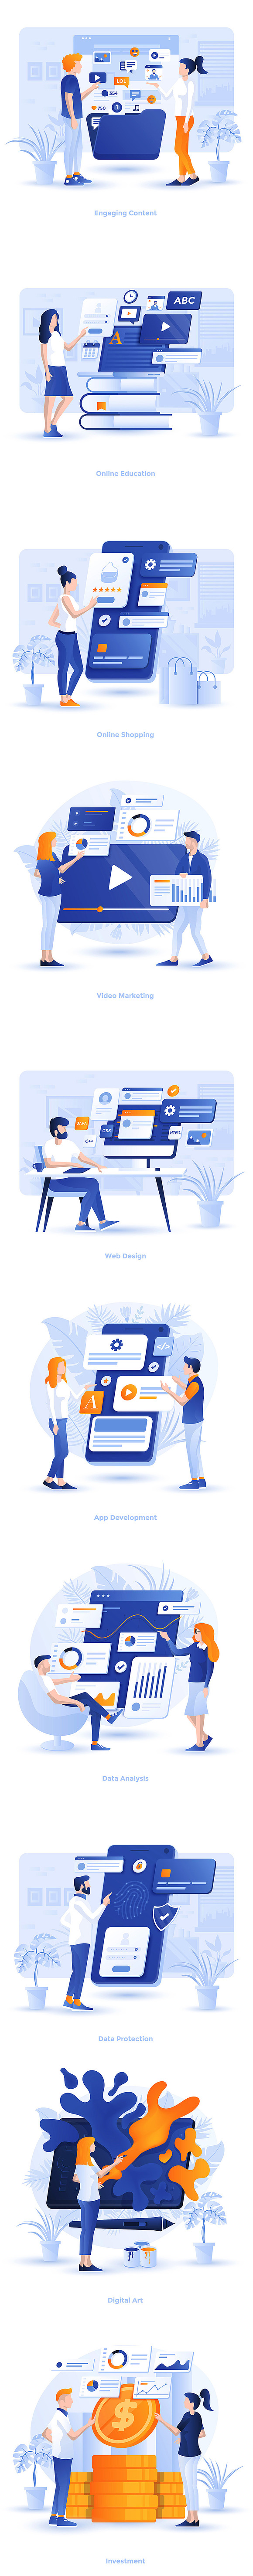 Modern Flat design Business concepts in Illustrations - product preview 11